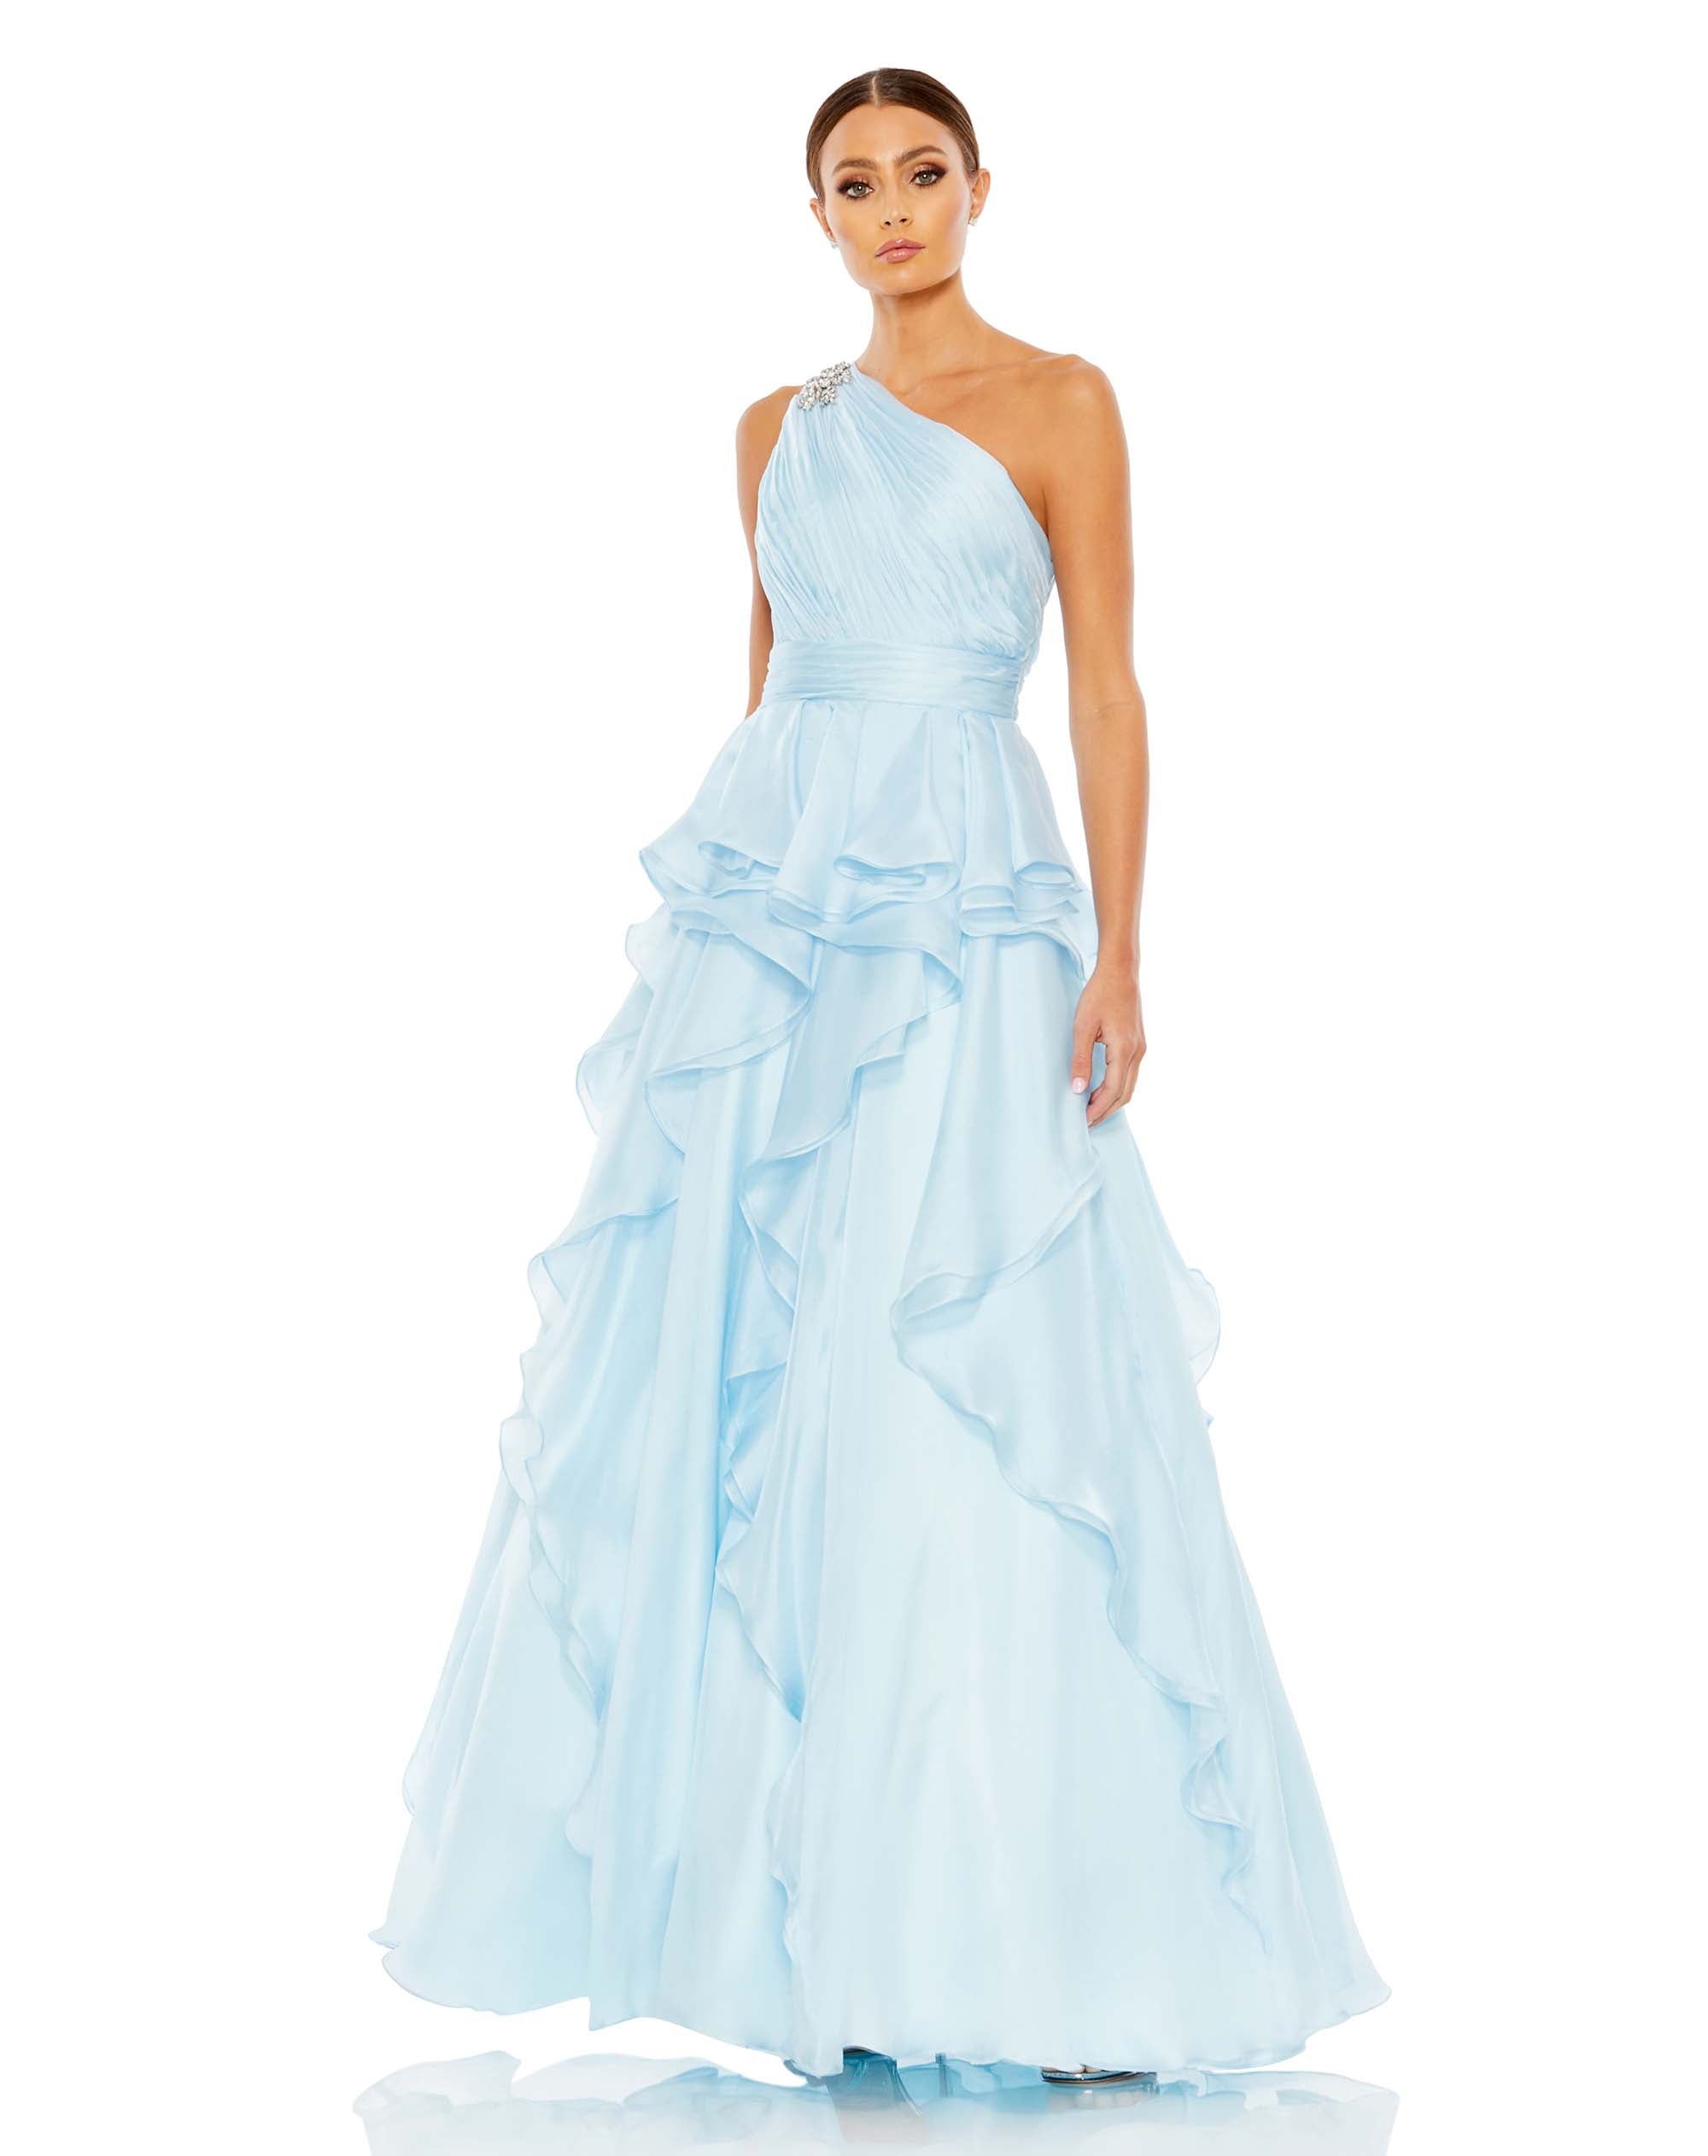 Jewel Broach One Shoulder Cascade Layered Gown